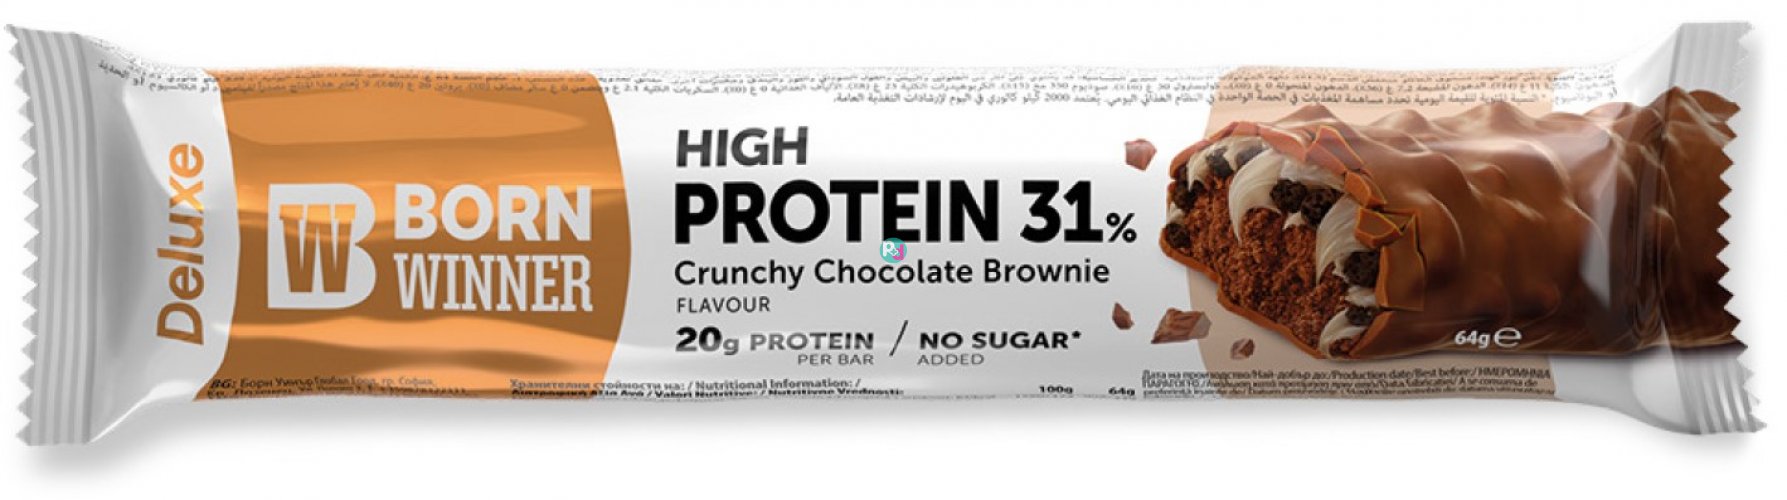 Born Winner Protein Bar Deluxe With Chocolate Brownies Flavor 64gr